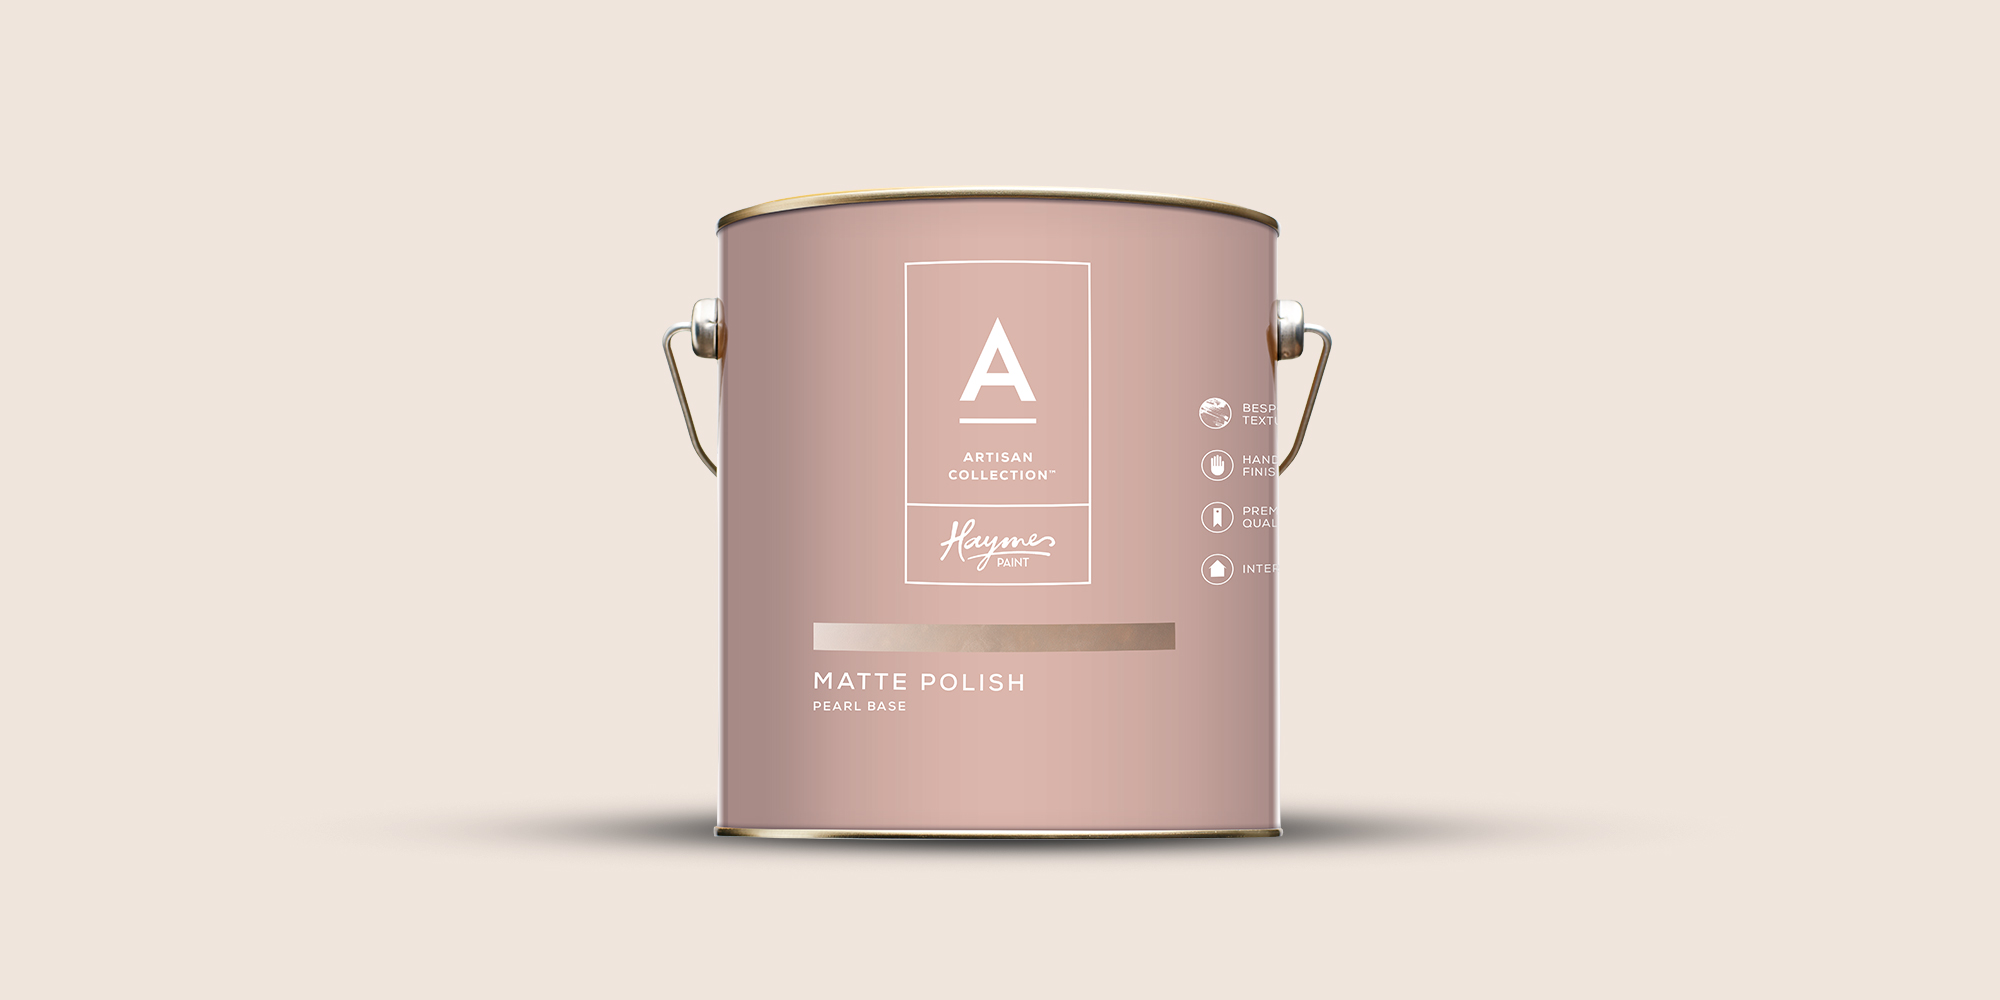 Haymes Artisan Collection Can Render